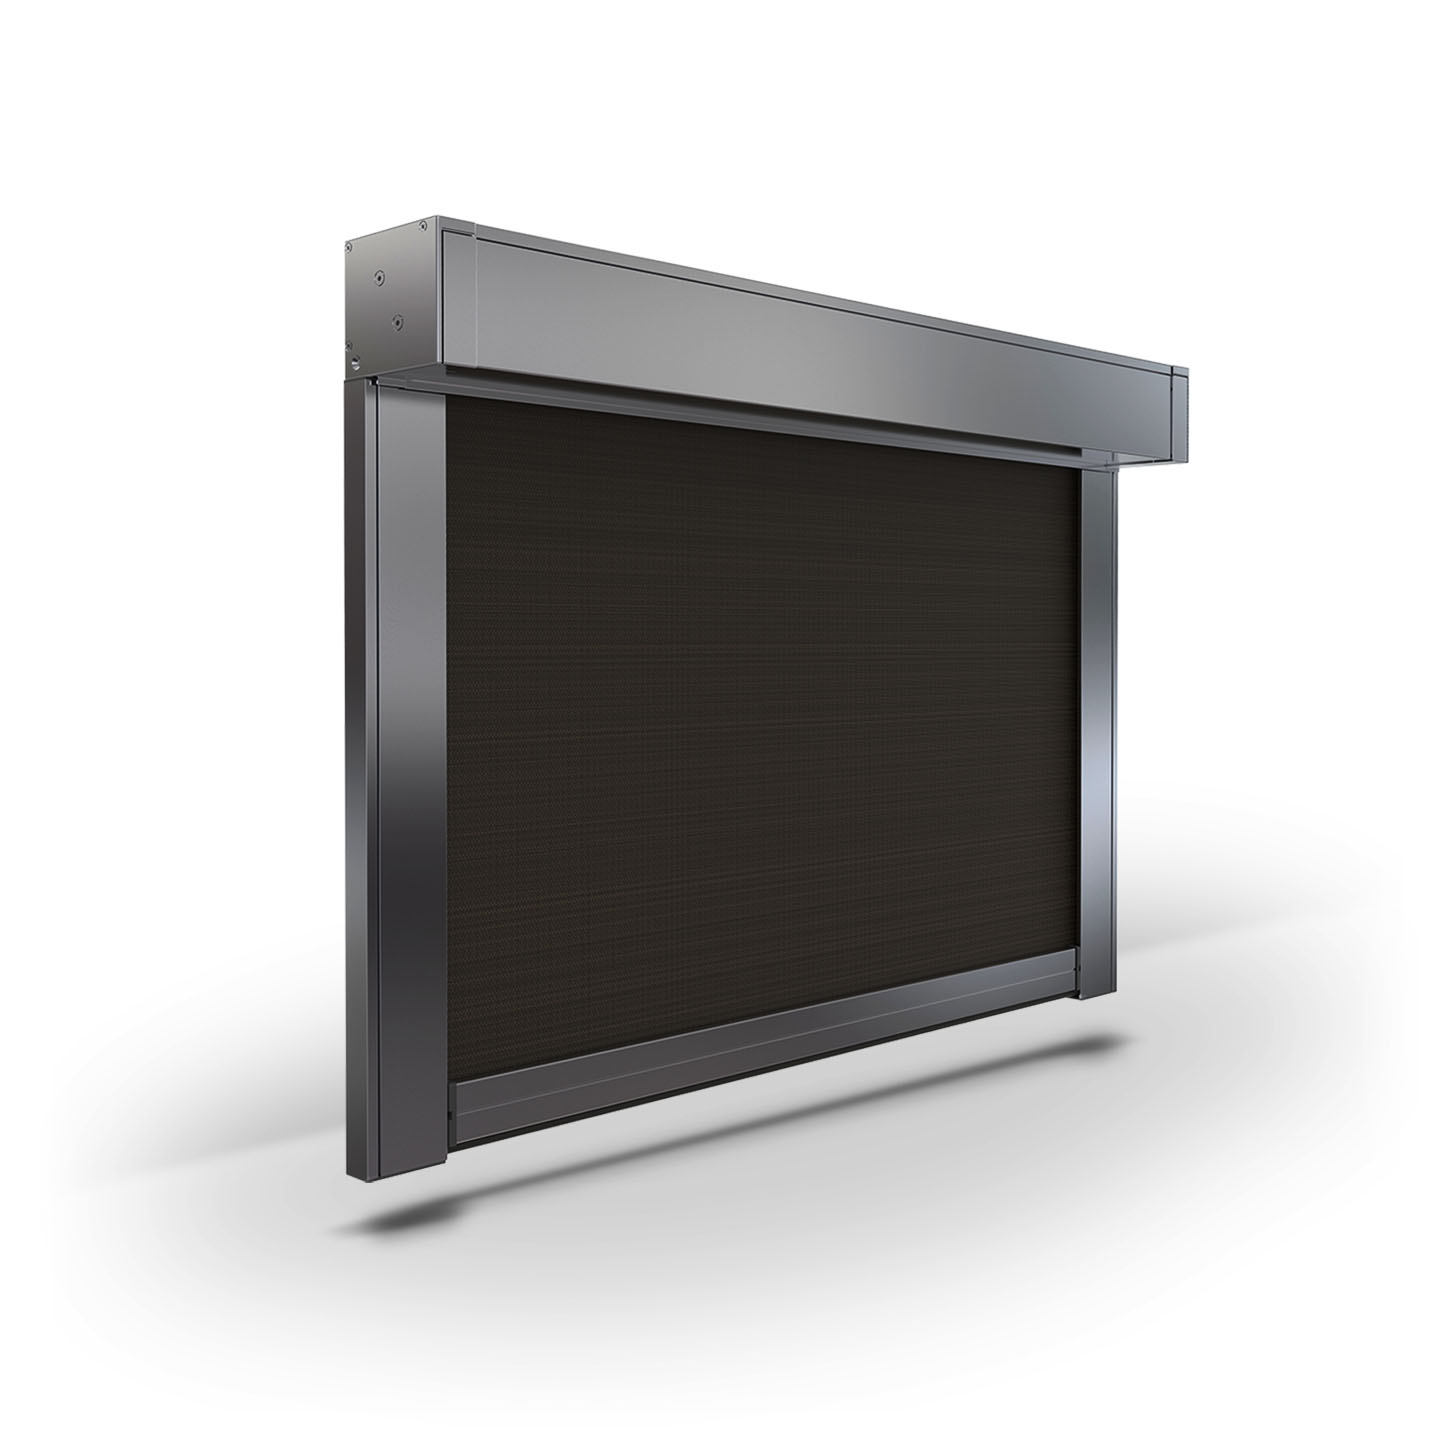 Zipscreen fully enclosed cassette channel guide blind in black